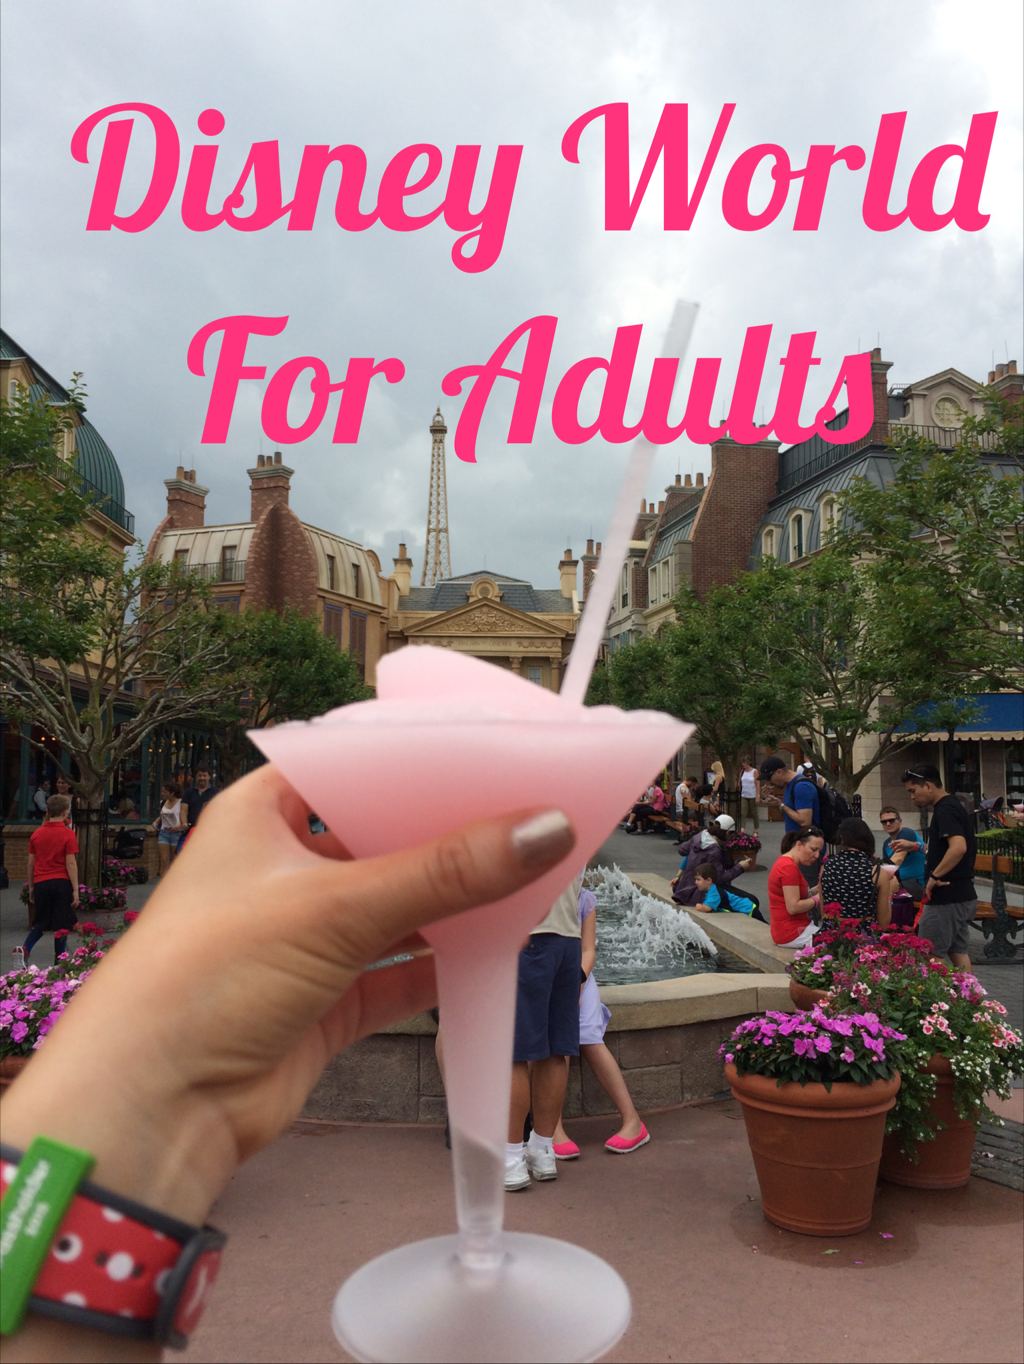 Disney World For Adults